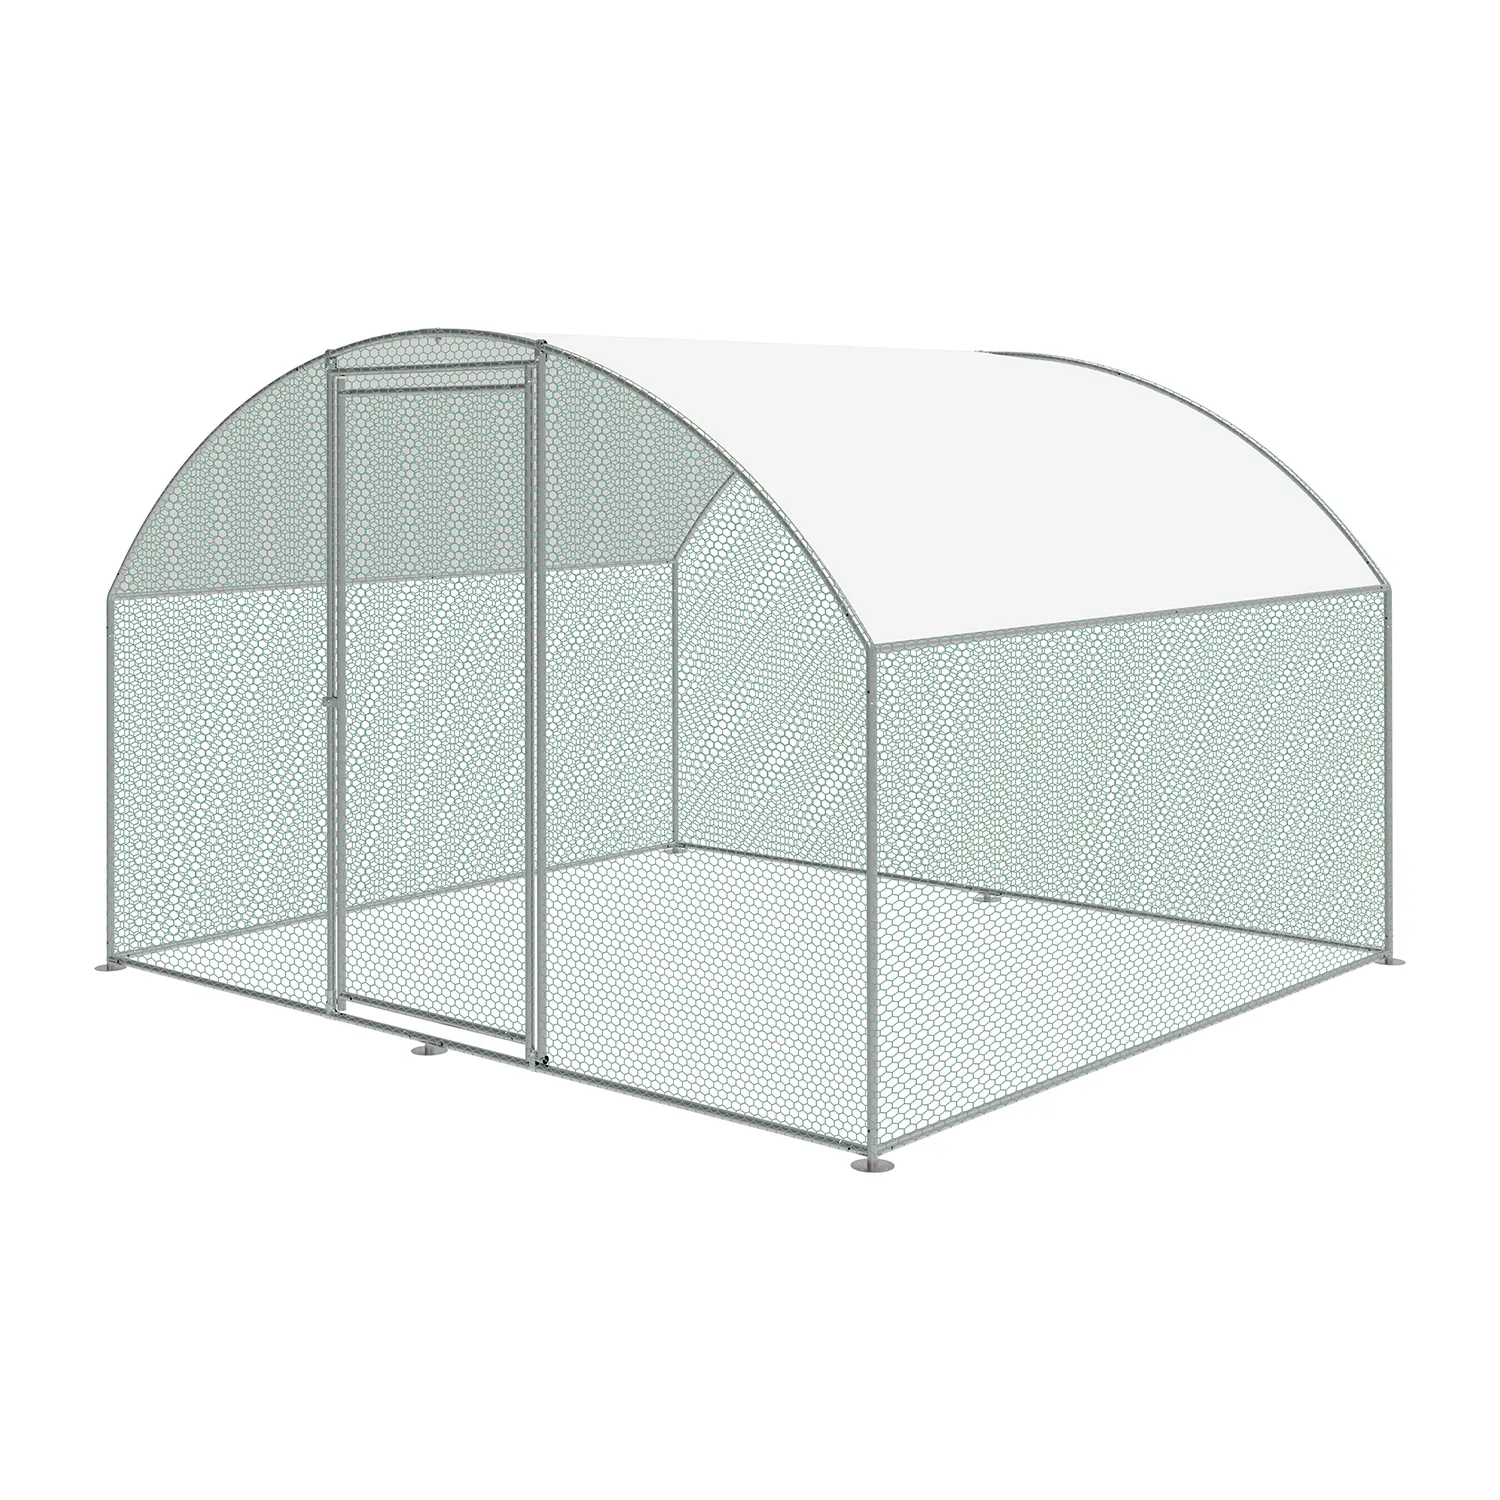 High Quality Professional Outdoor Farm Steel Structure For Large Chicken House Chicken cage